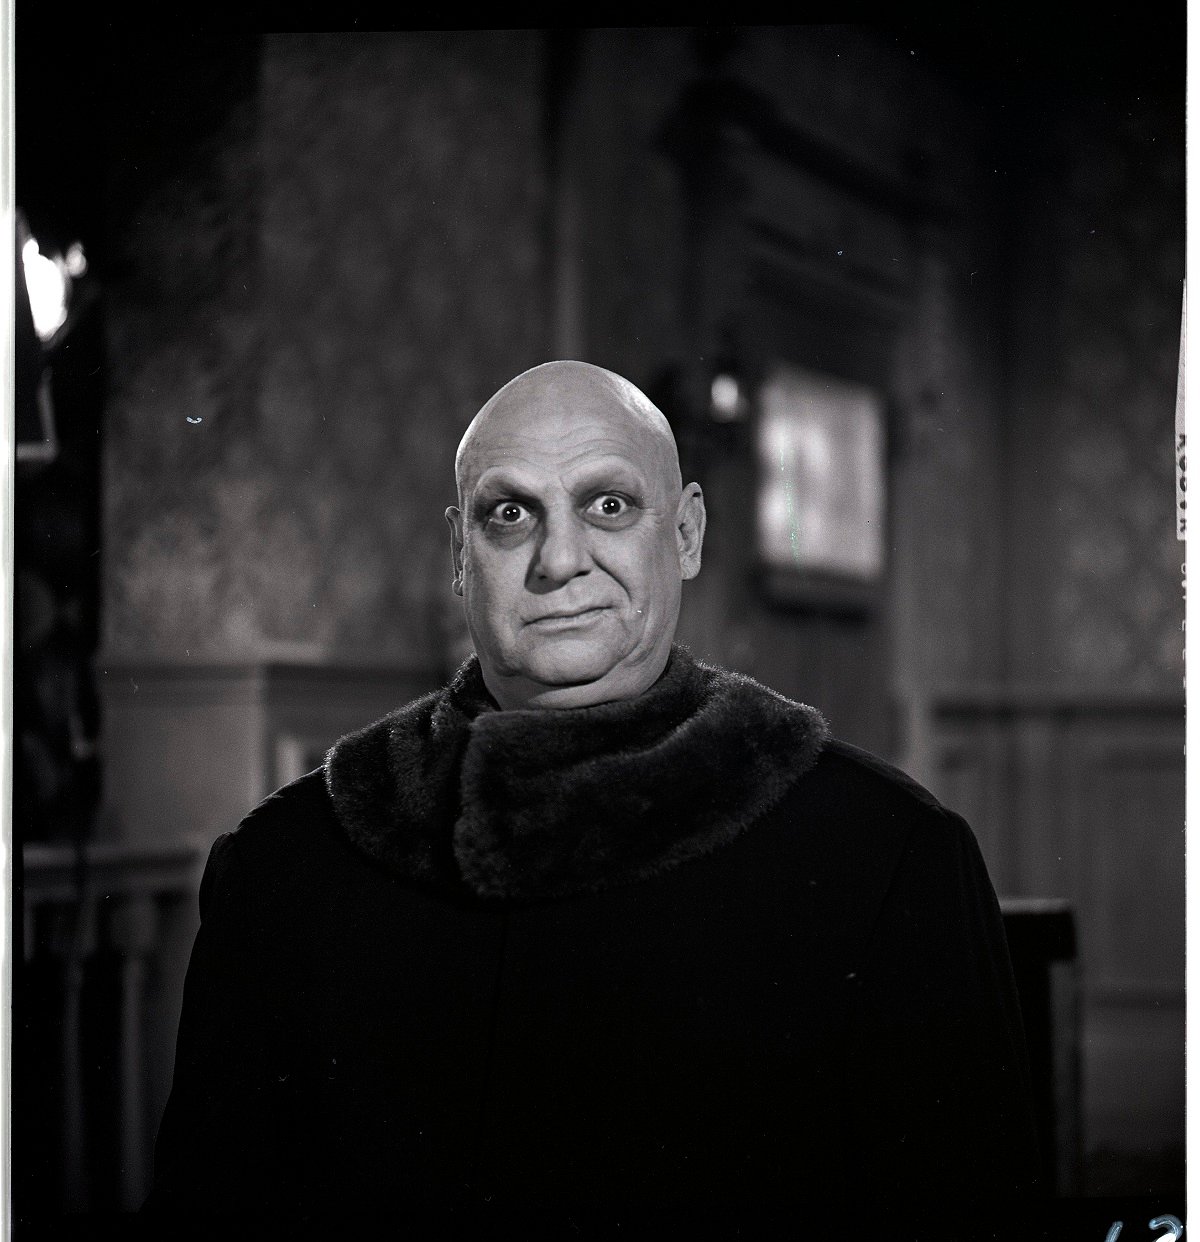 'The Addams Family' star Jackie Coogan dressed as his character Uncle Fester.